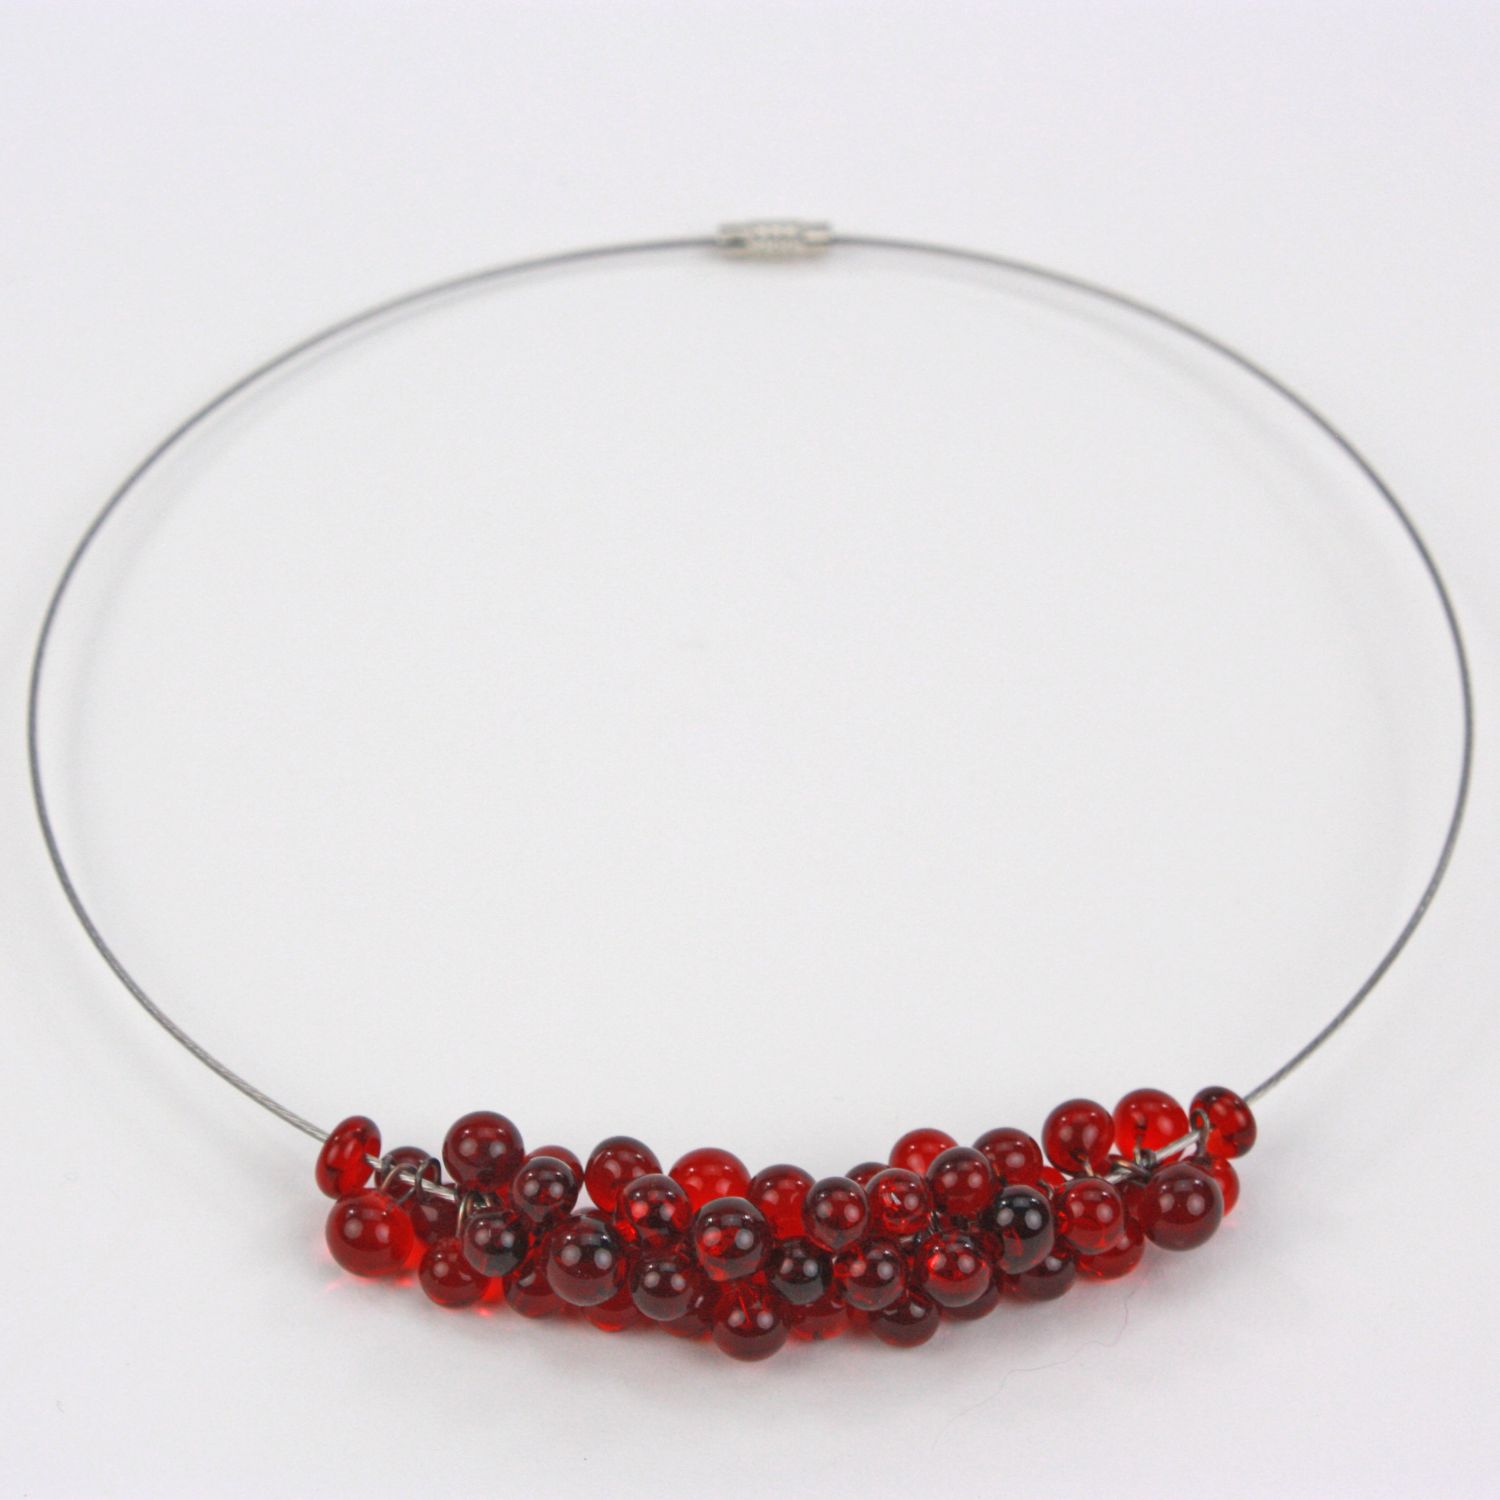 Alicia Niles: Petite Chroma Necklace – Red Product Image 3 of 3